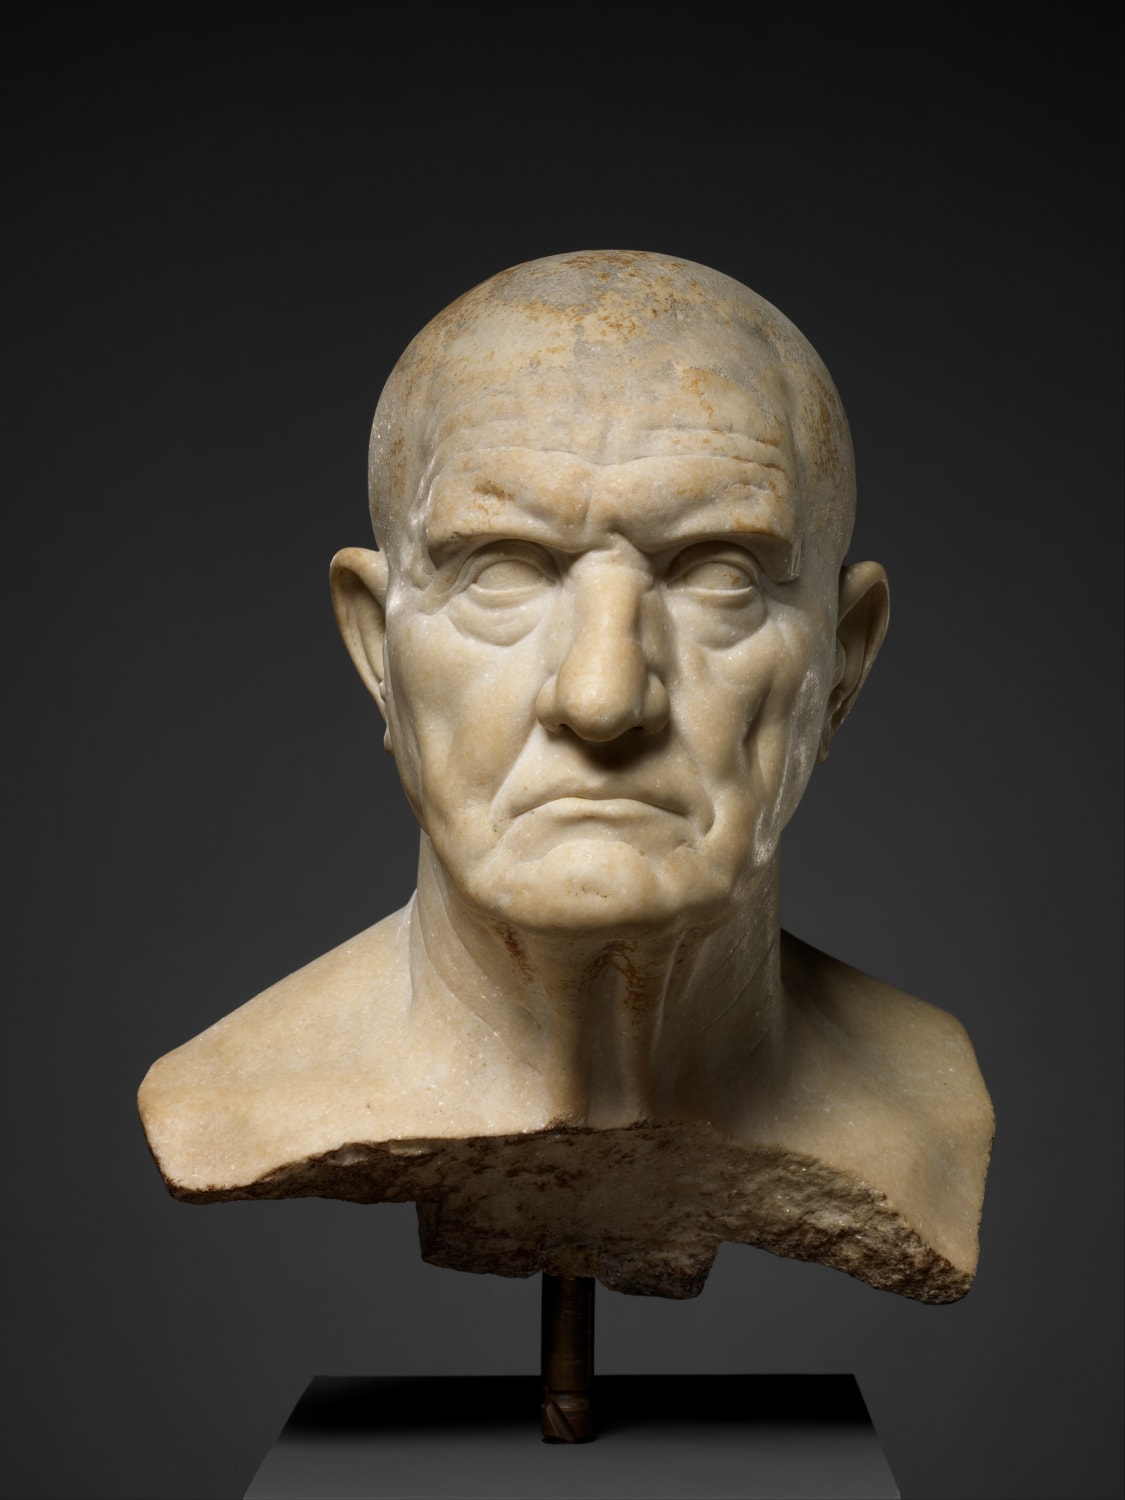 A Roman marble bust of a man. Mid-1st century CE, Julio-Claudian dynasty, now on display at the Metropolitan museum